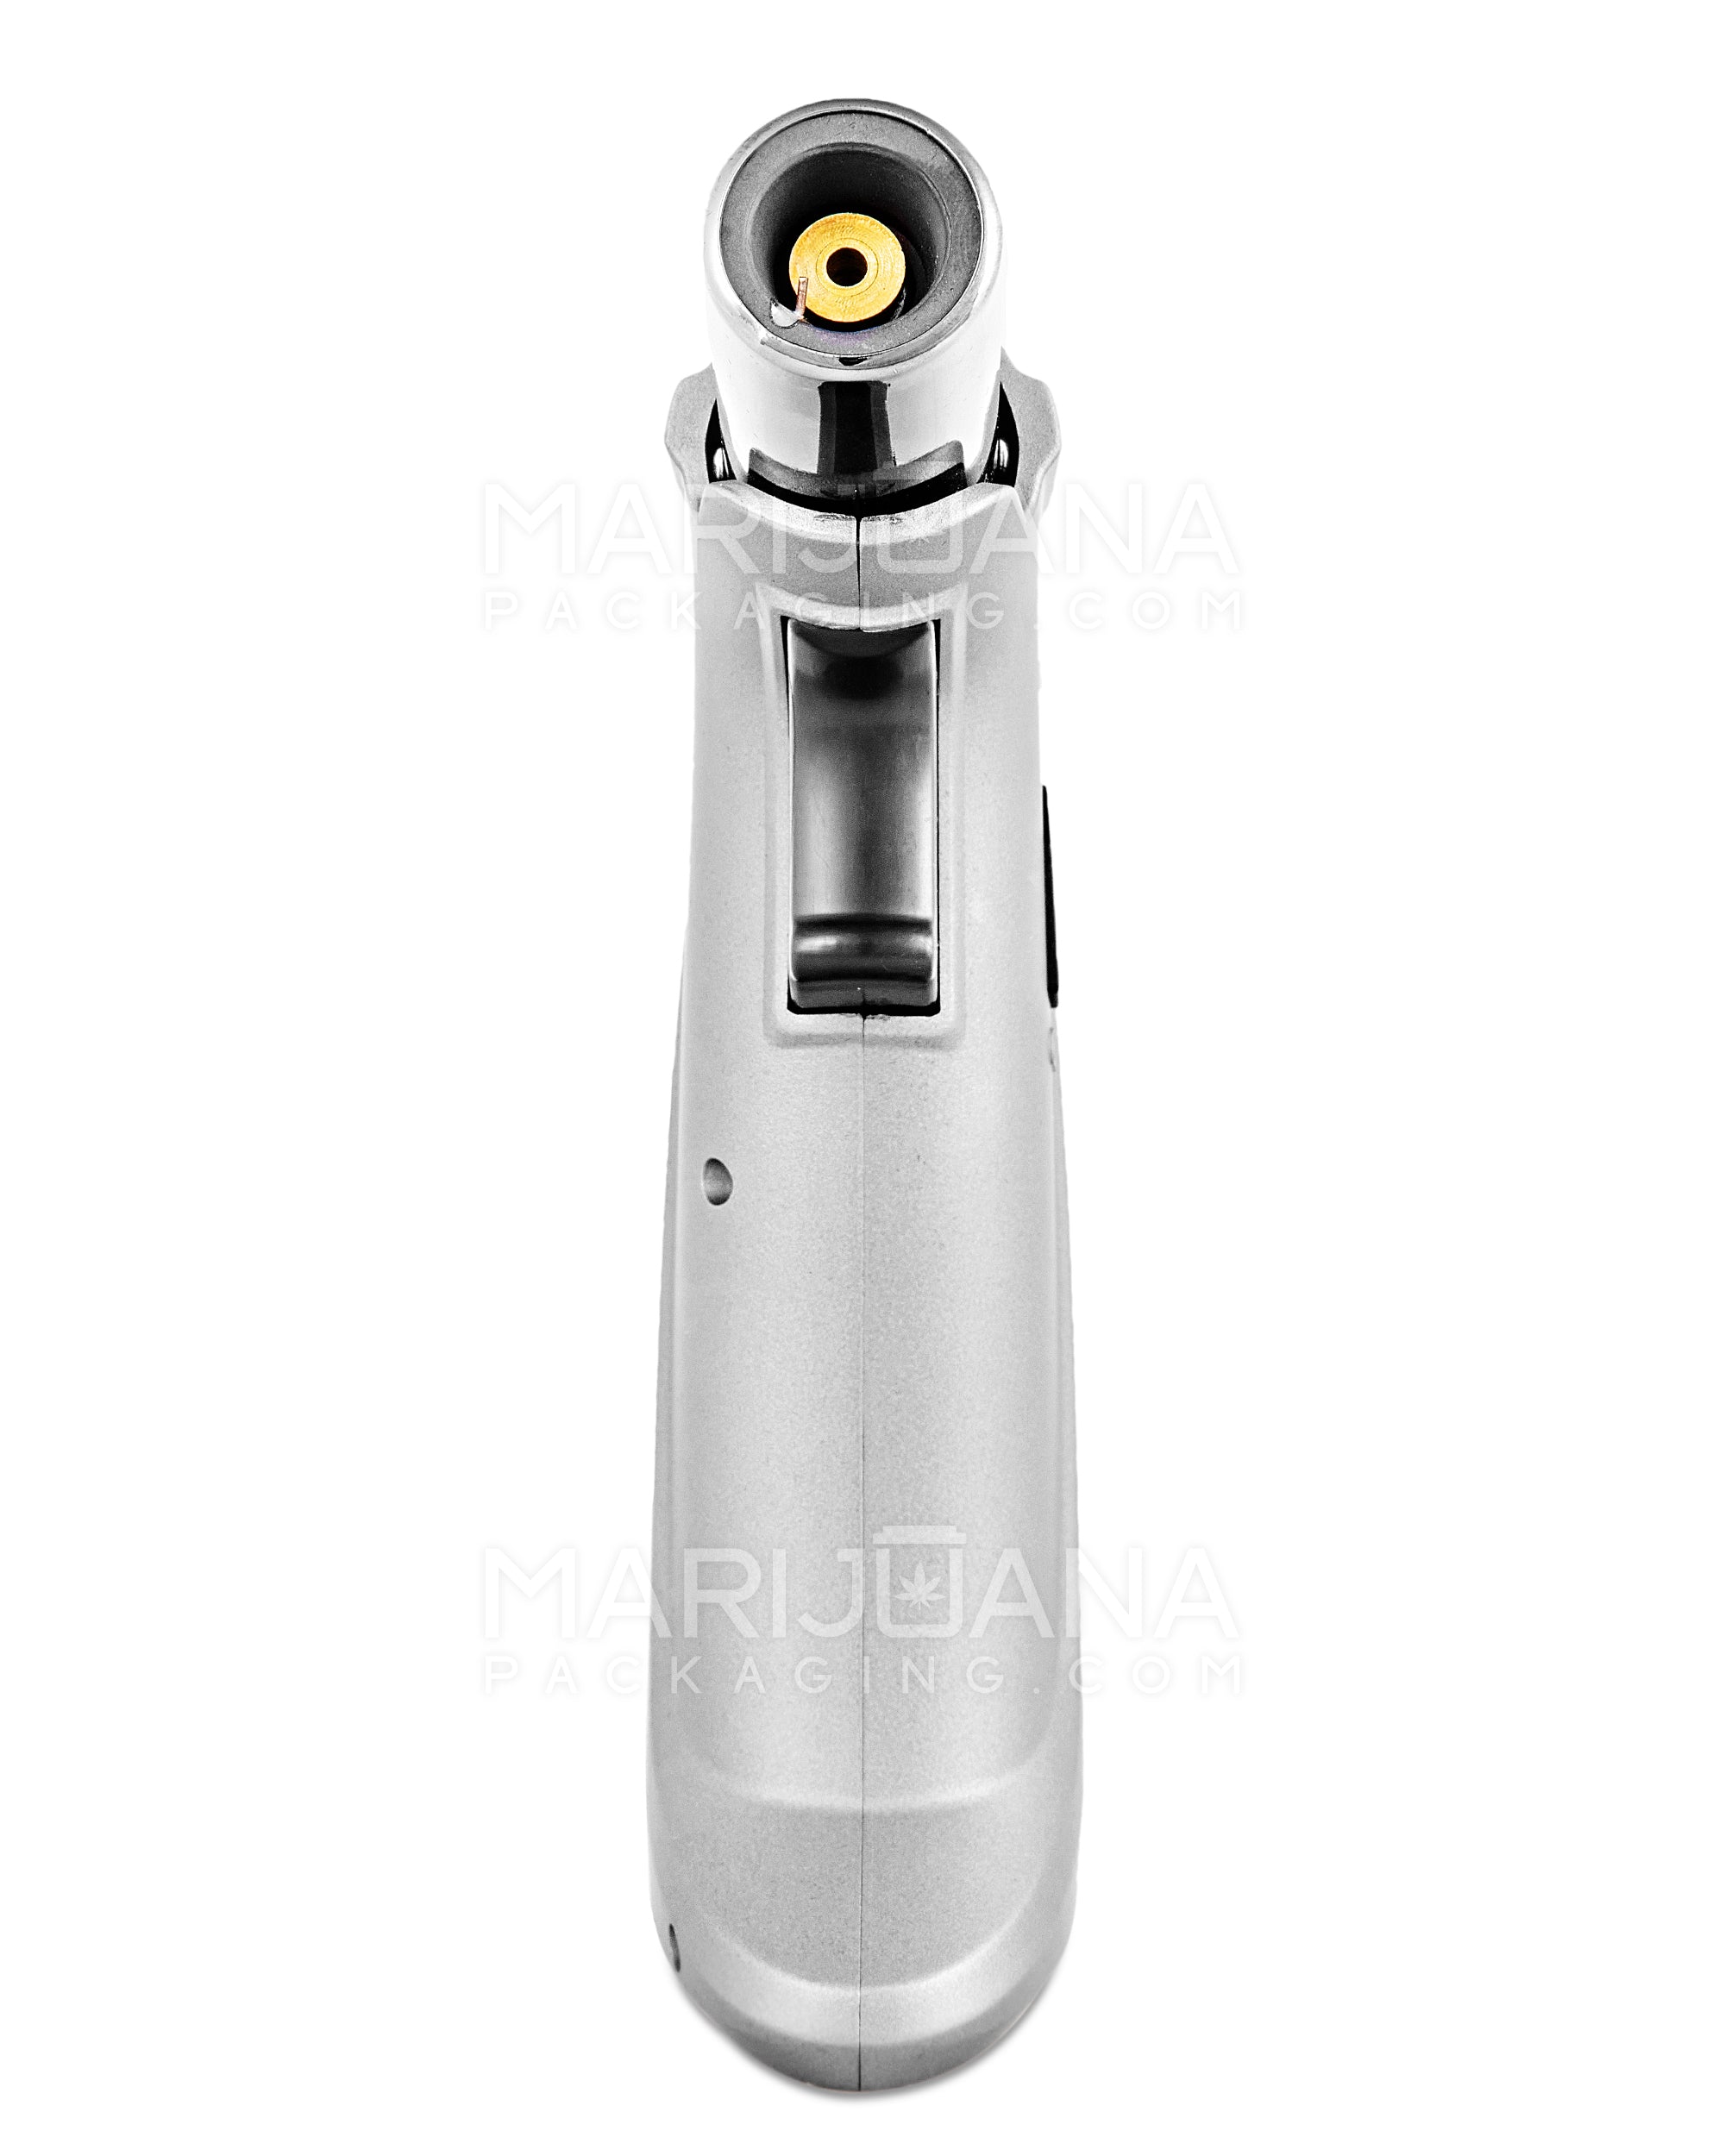 TECHNO | High Angle Metal Torch w/ Safety Lock | 6.5in Tall - Butane - Gray - 3